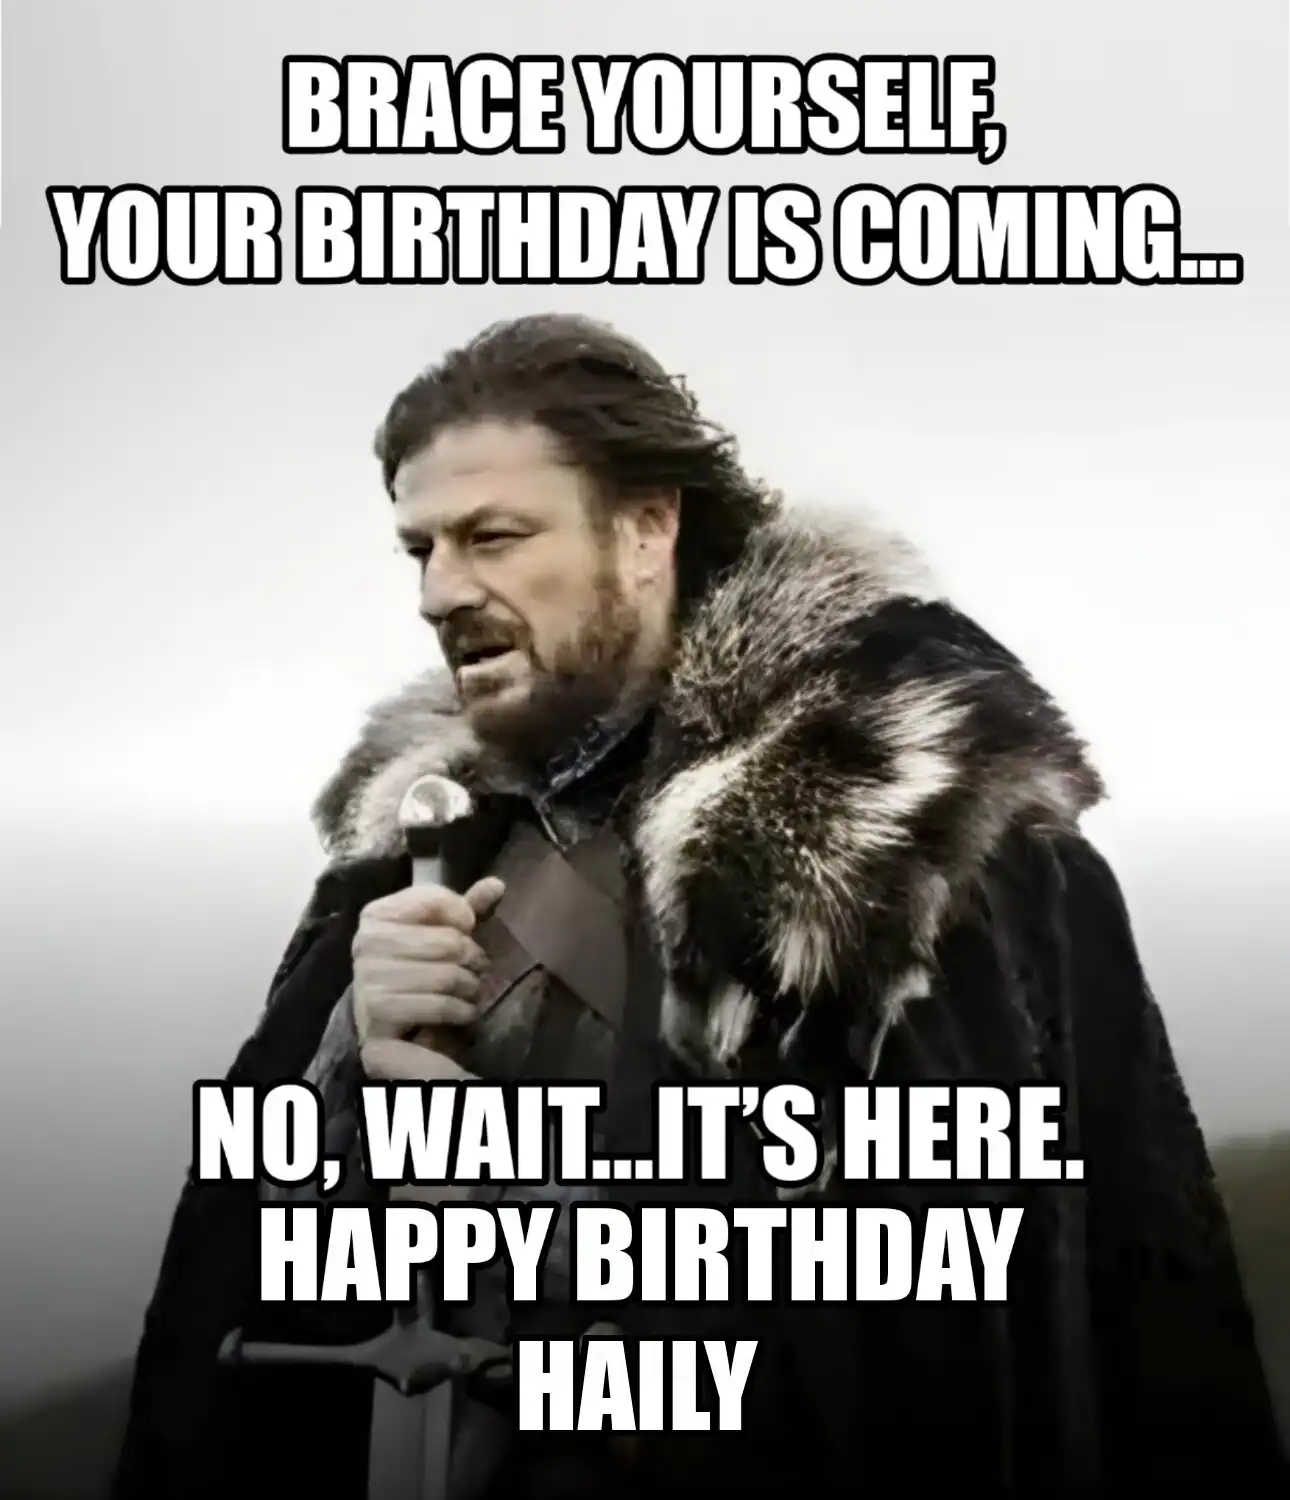 Happy Birthday Haily Brace Yourself Your Birthday Is Coming Meme